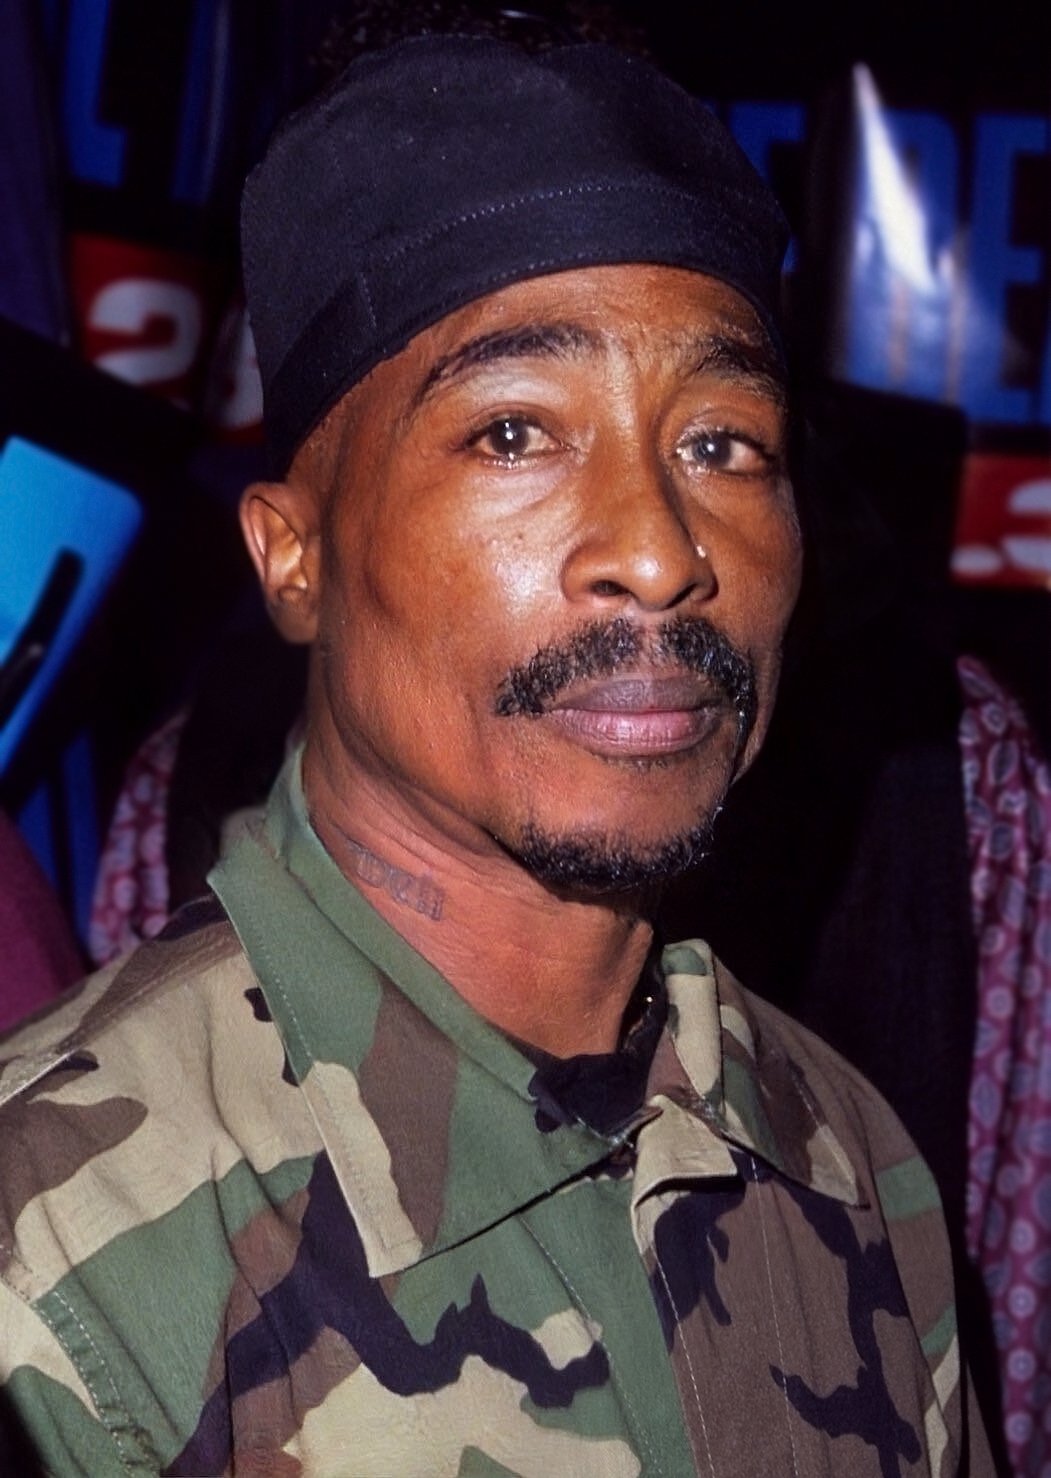 The older Tupac Shakur | Source: Getty Images